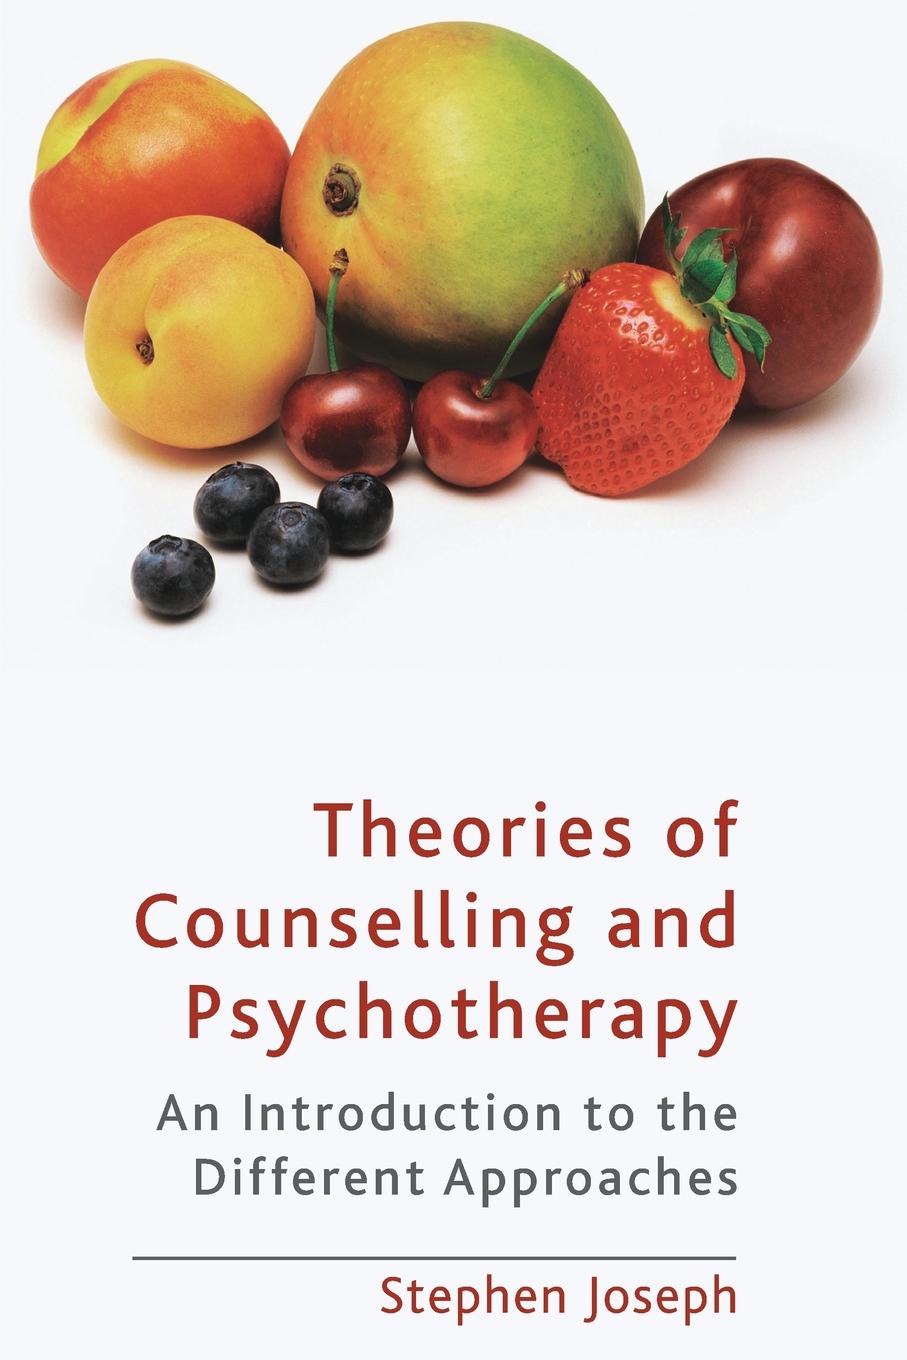 Theories of Counselling and Psychotherapy. An Introduction to the Different Approaches